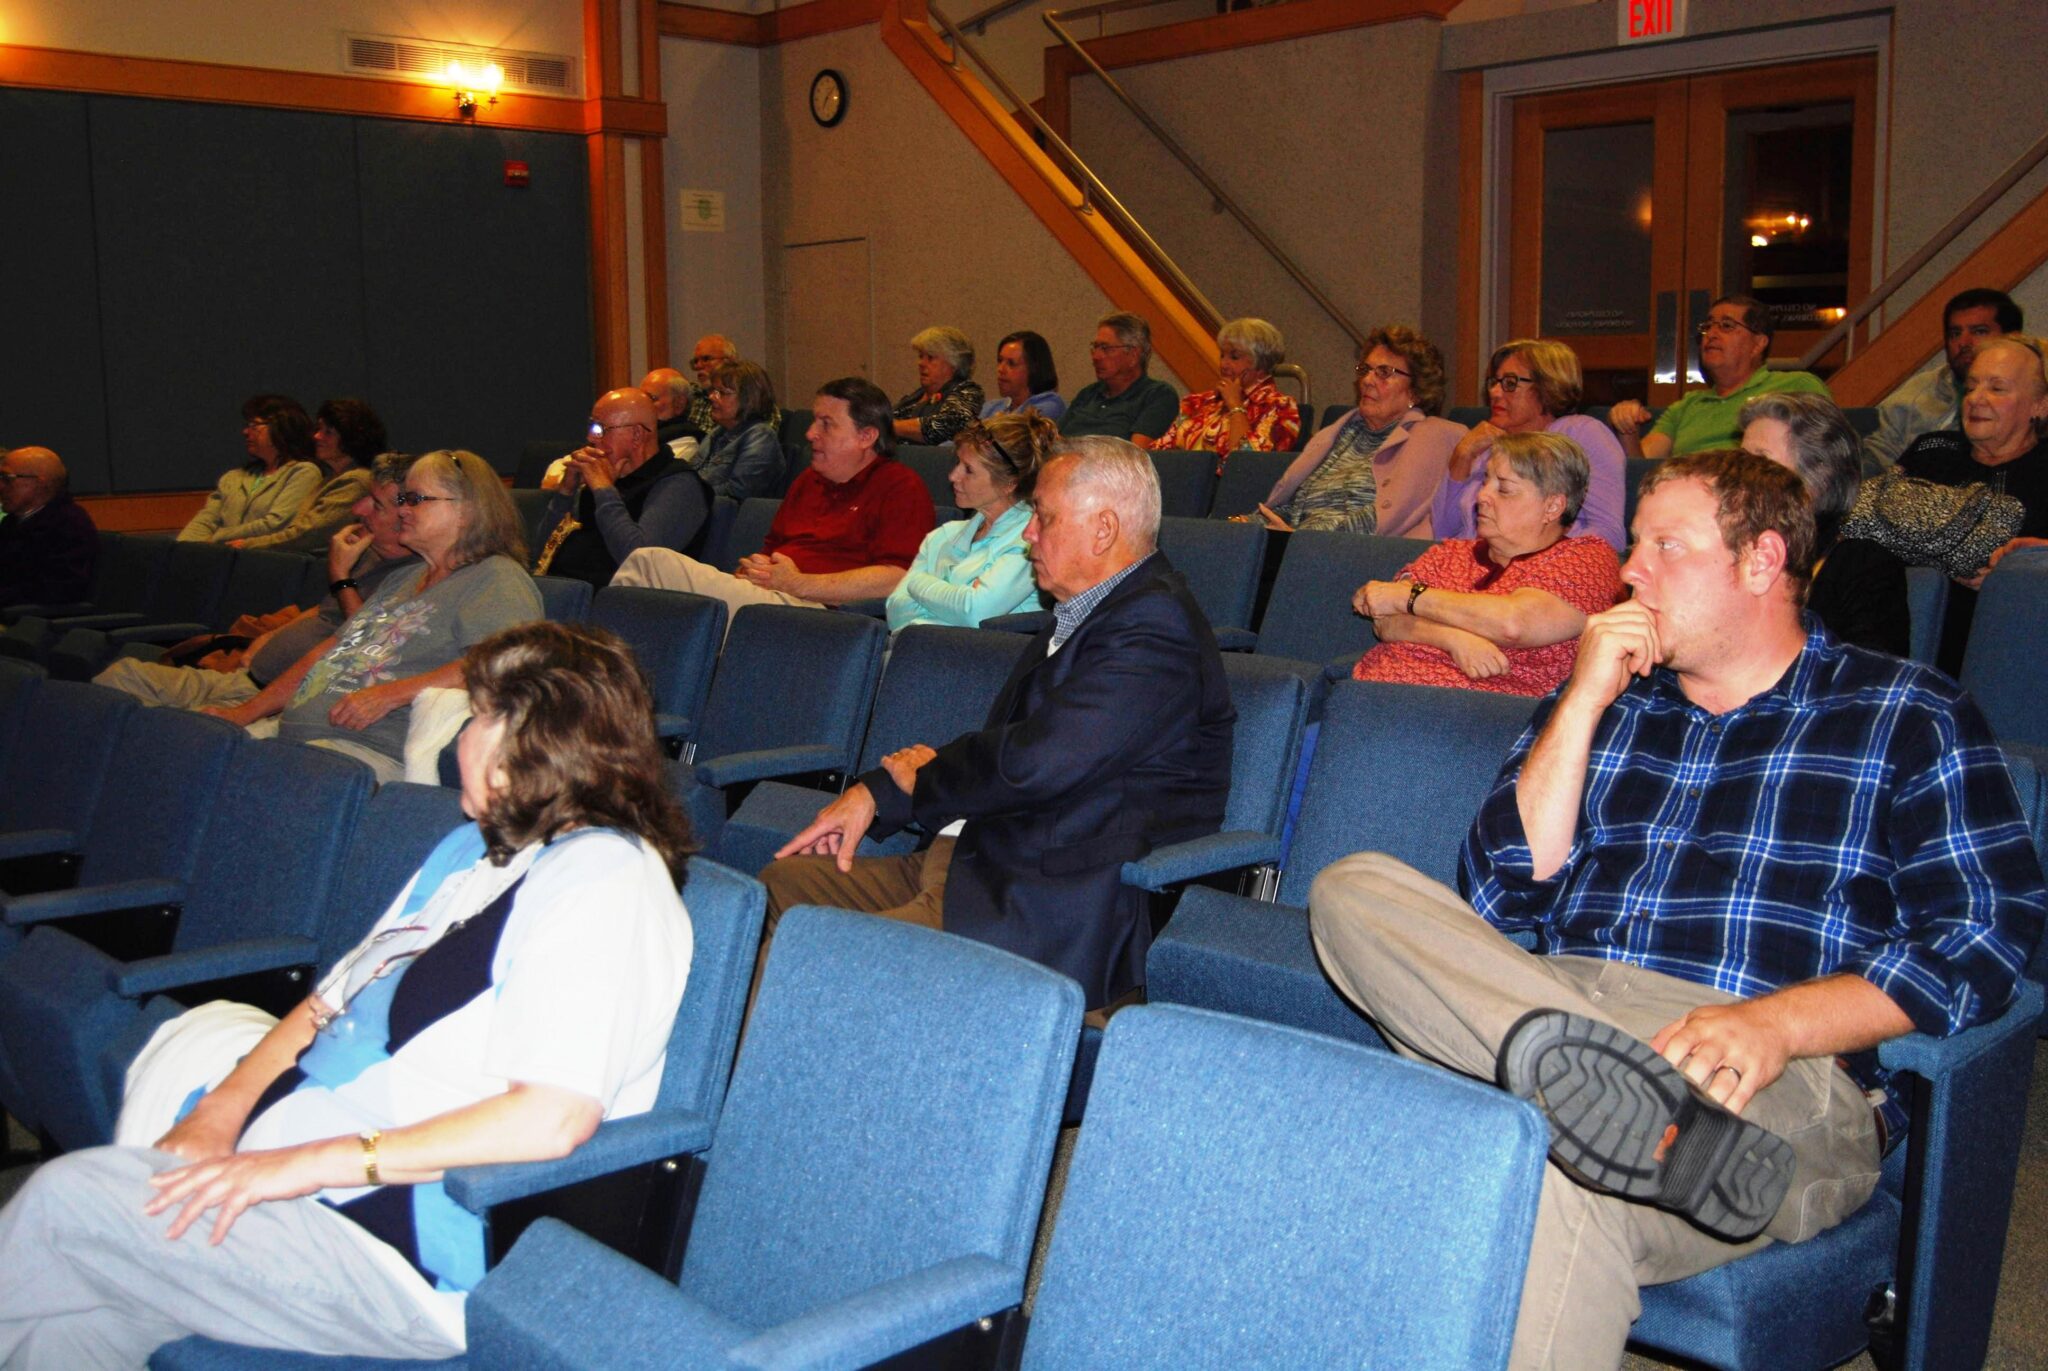 Rep. Joe Daning (center) was in the audience on Thursday, Nov. 17 for Mayor Heitzler’s final history lecture of 2016.